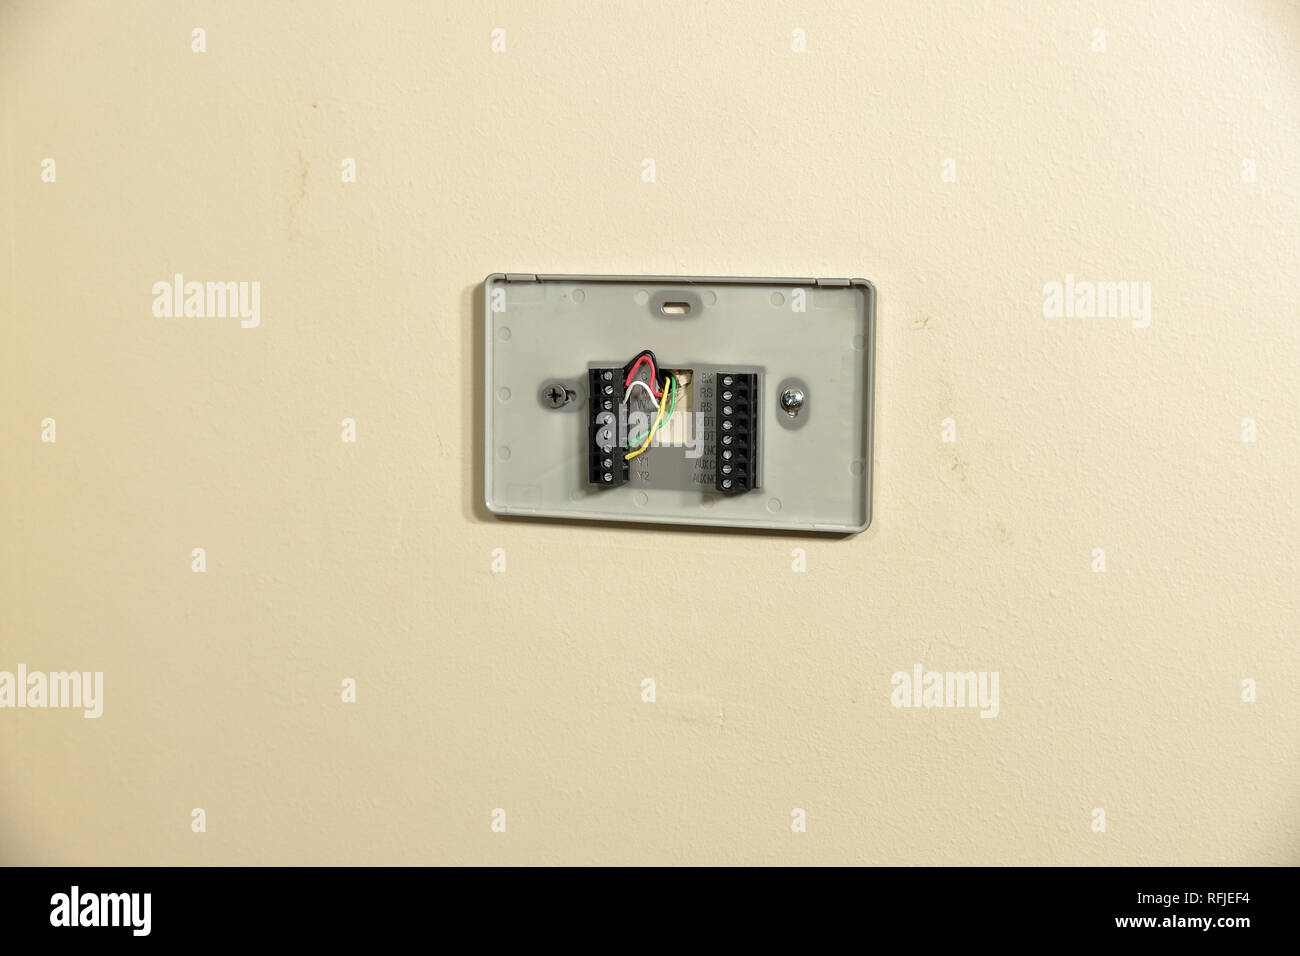 Thermostat wiring plate on wall for installation Stock Photo